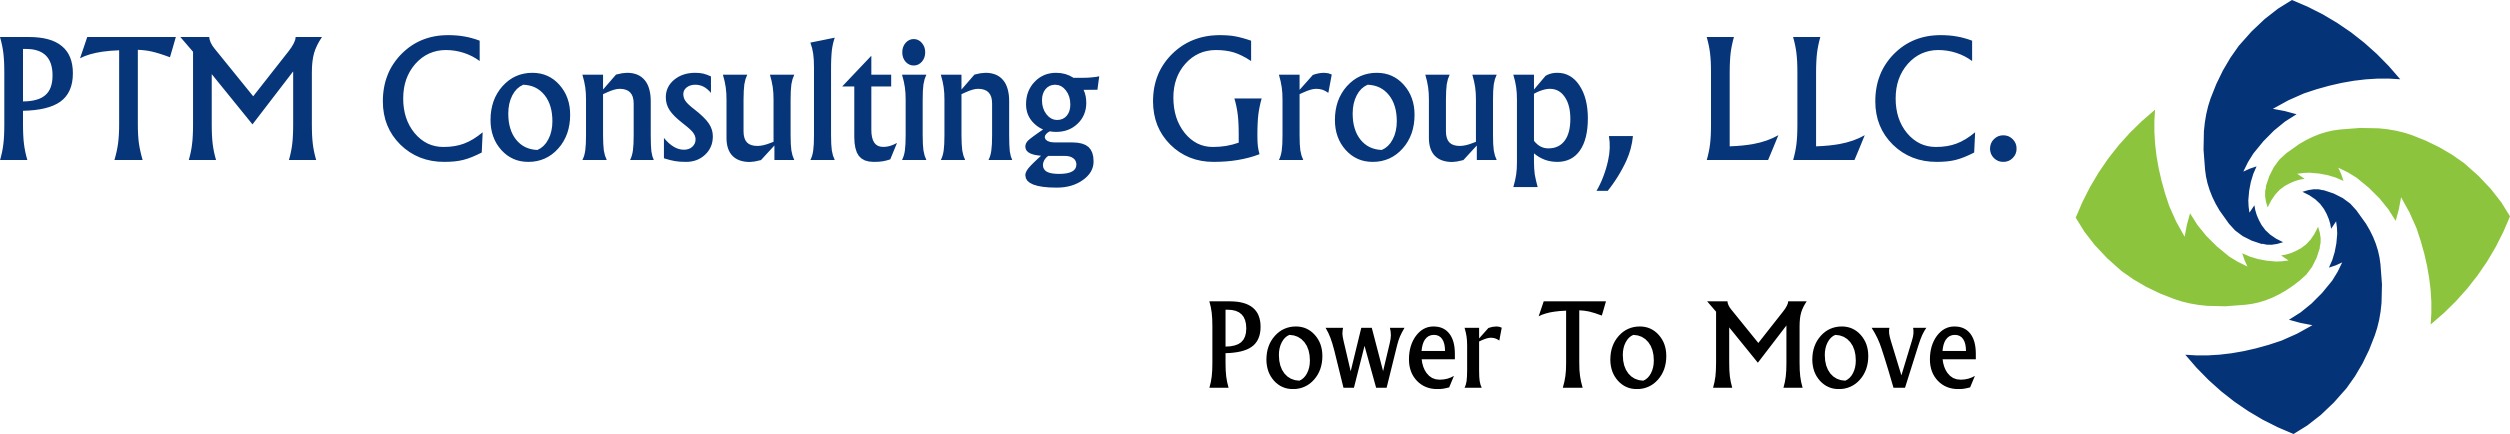 PTM Consulting Group